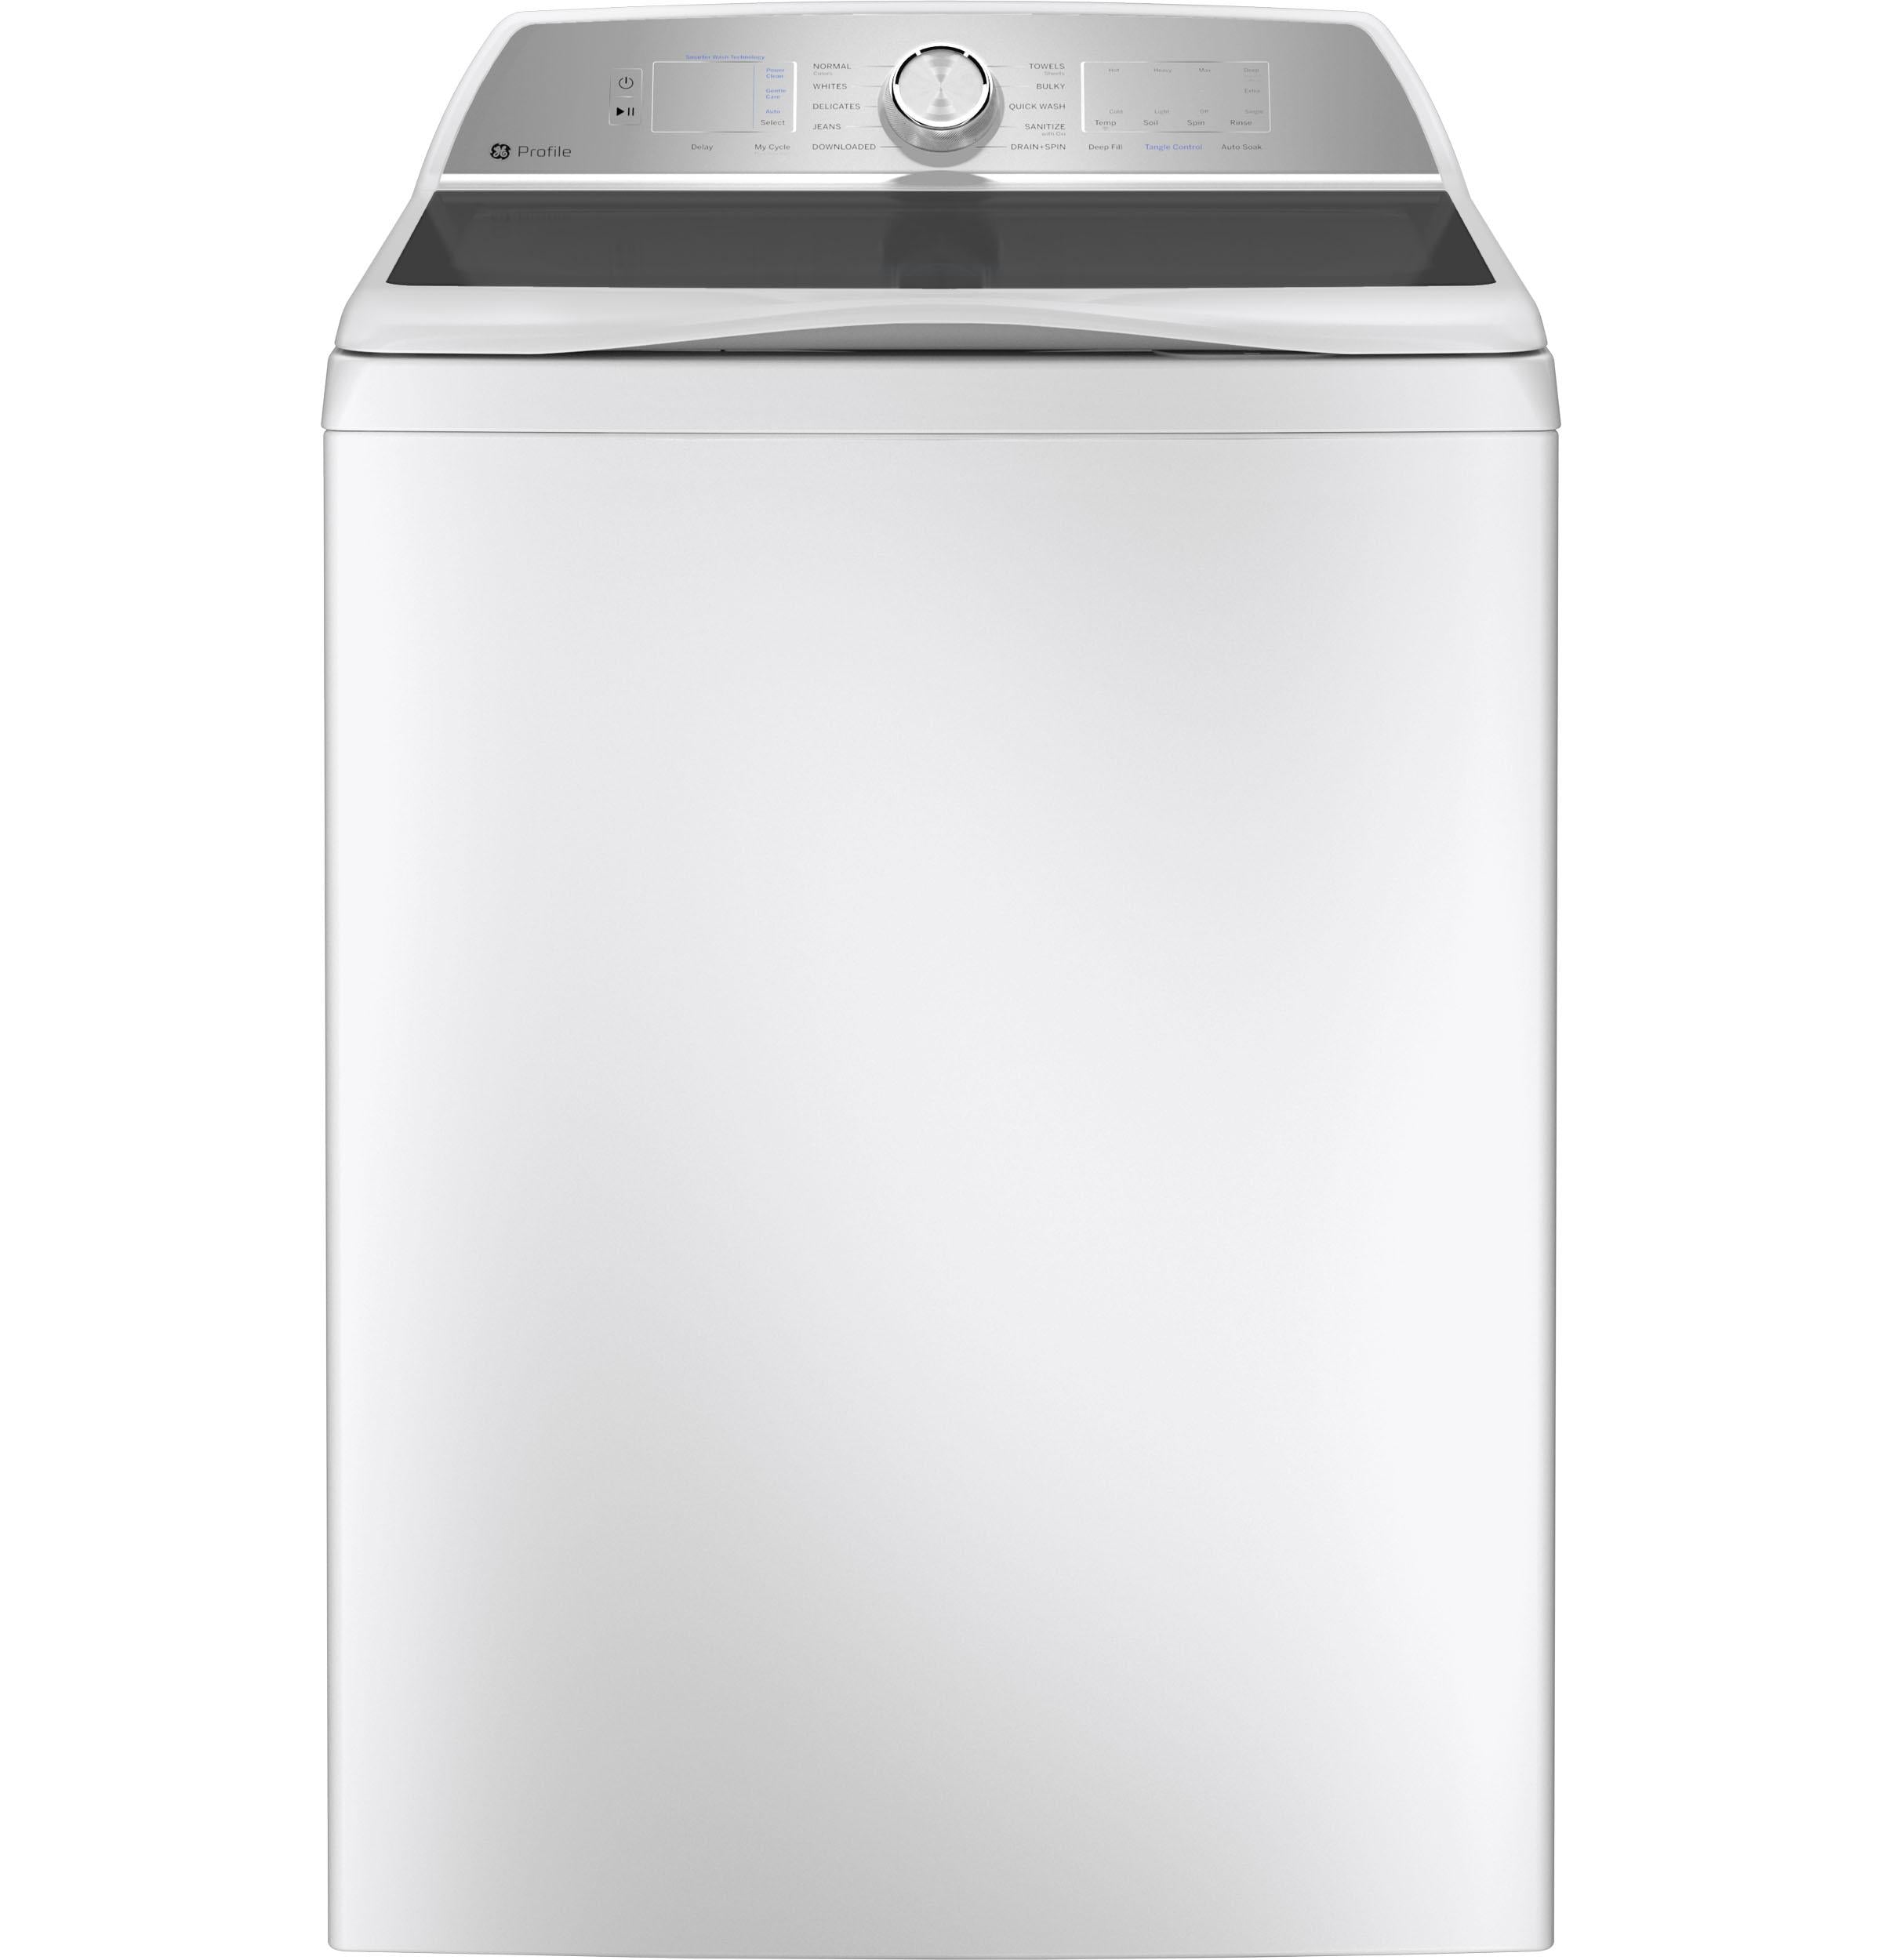 GE Profile™ ENERGY STAR® 4.9 cu. ft. Capacity Washer with Smarter Wash Technology and FlexDispense™